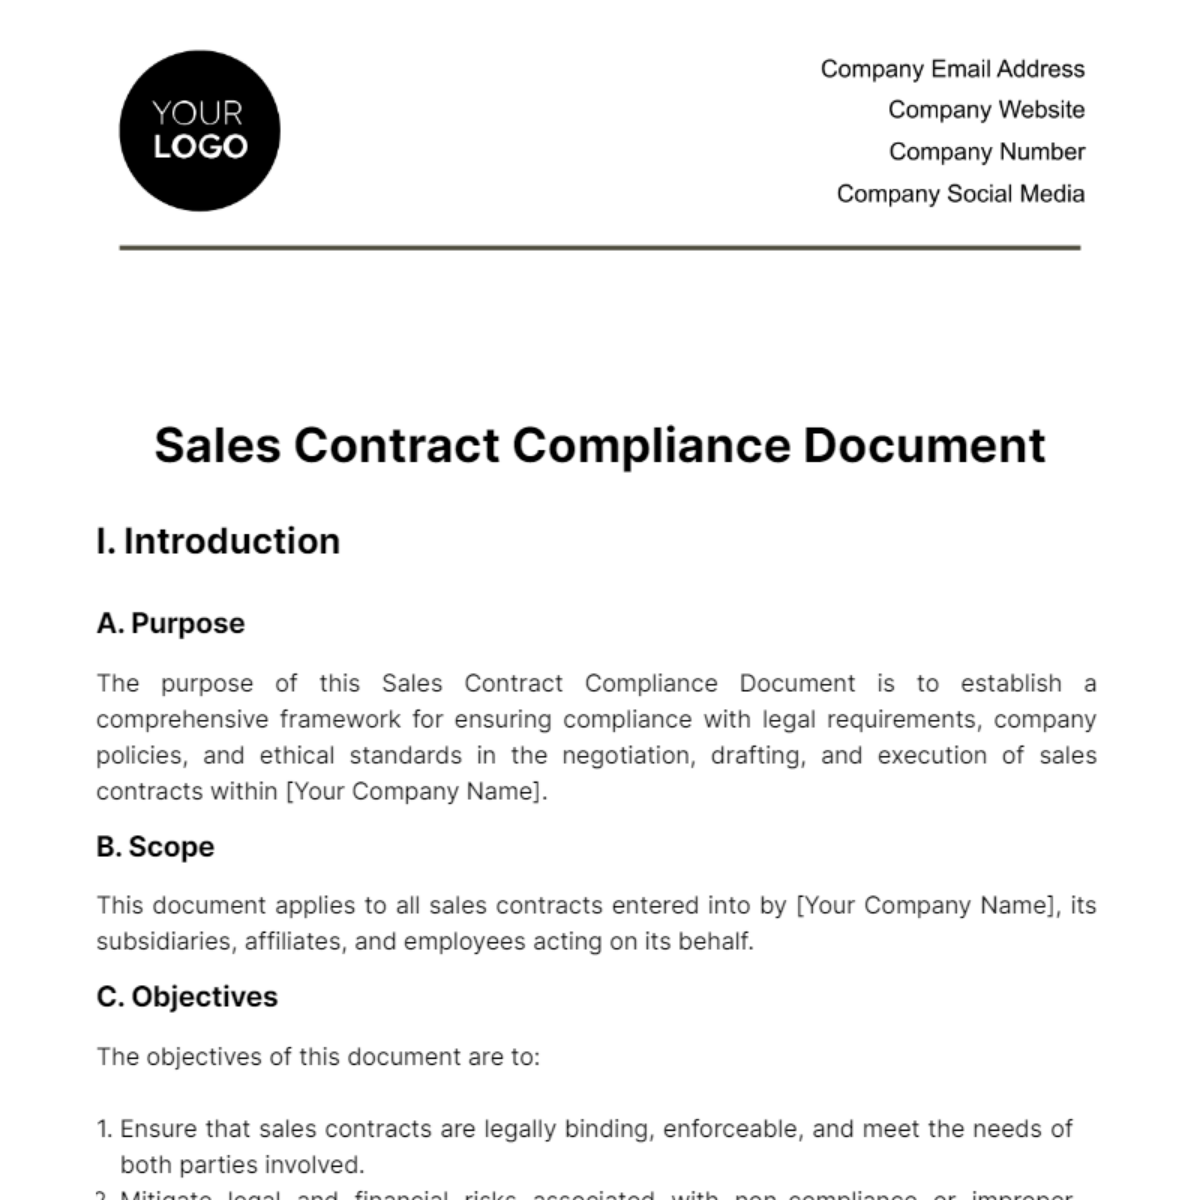 Free Sales Contract Compliance Document Template